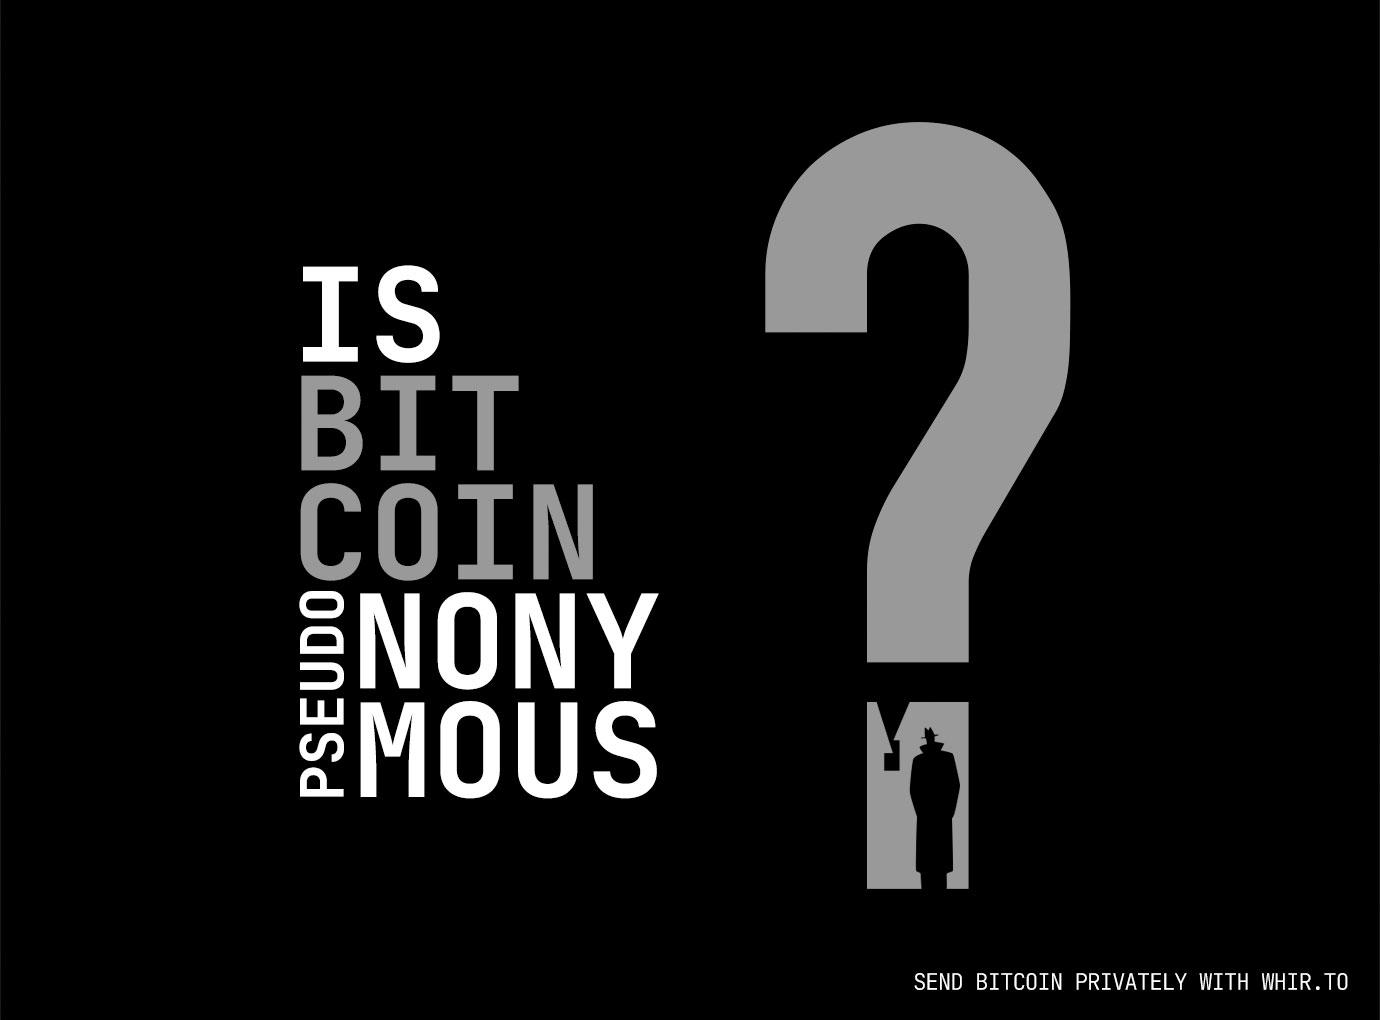 Is Bitcoin anonymous?